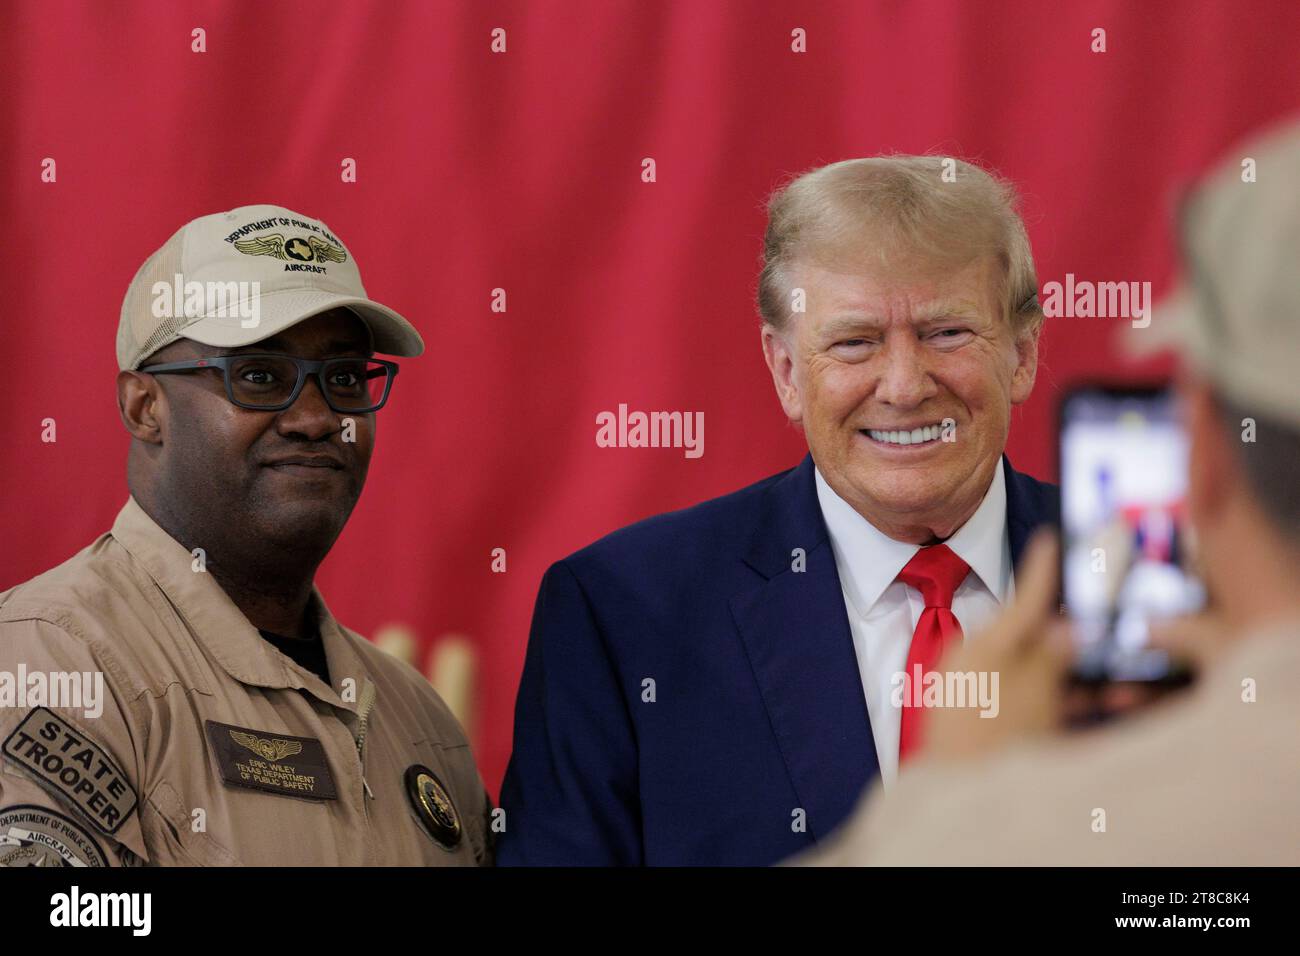 Edinburg, Texas USA, November 19 2023: Former President DONALD TRUMP, a candidate for the Republican presidential nomination, poses for a photo with a member of the Texas Department of Public Safety at the South Texas International Airport. Trump flew in for a campaign rally at the airport. Photo by Michael Gonzalez/Pool Stock Photo